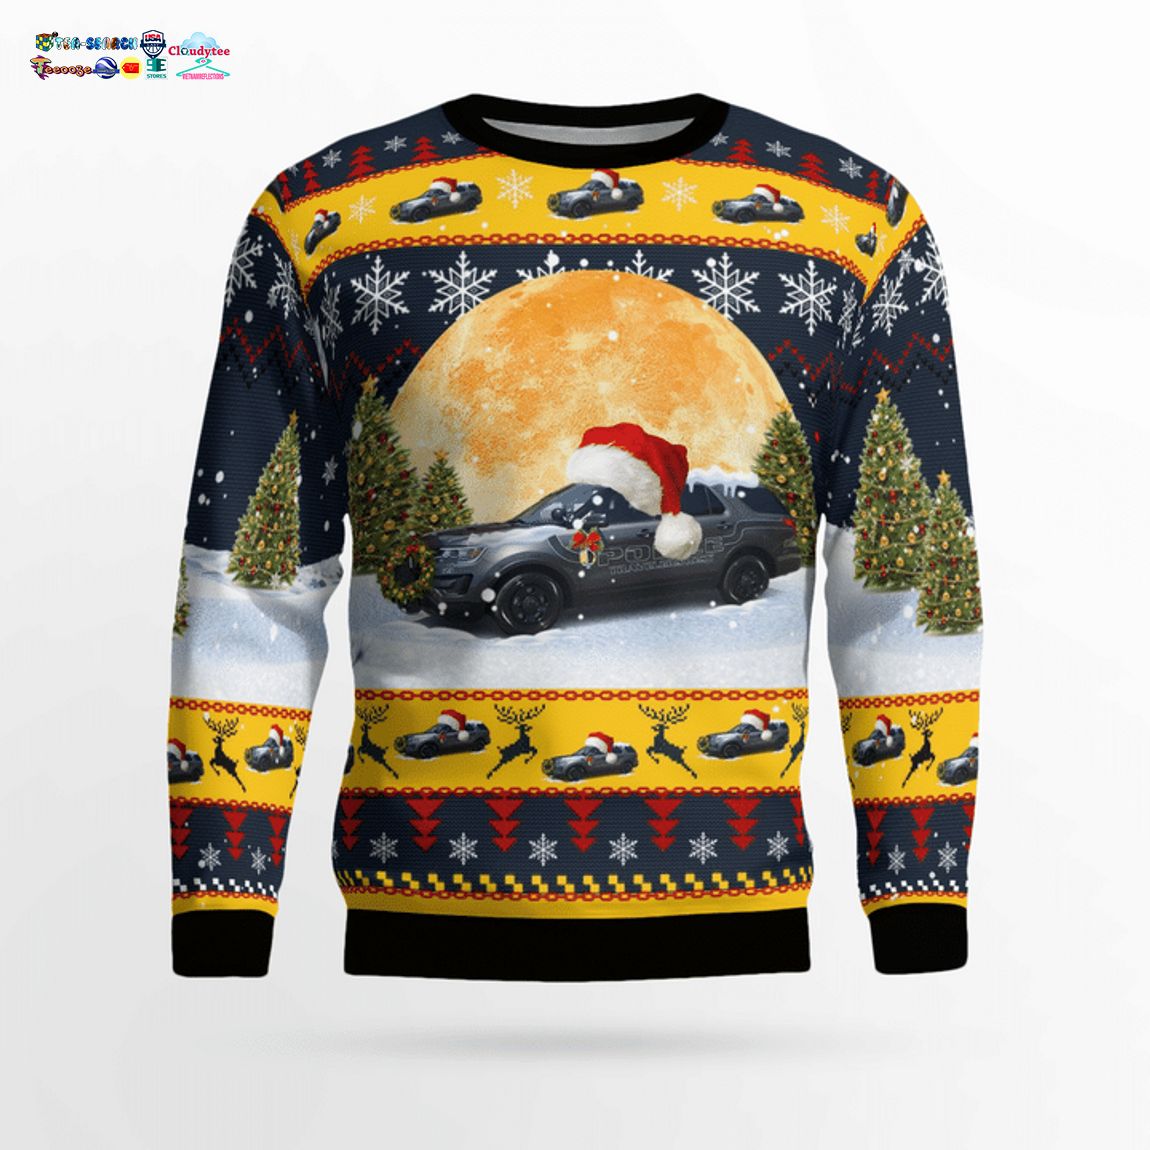 South Carolina Travelers Rest Police Department 3D Christmas Sweater